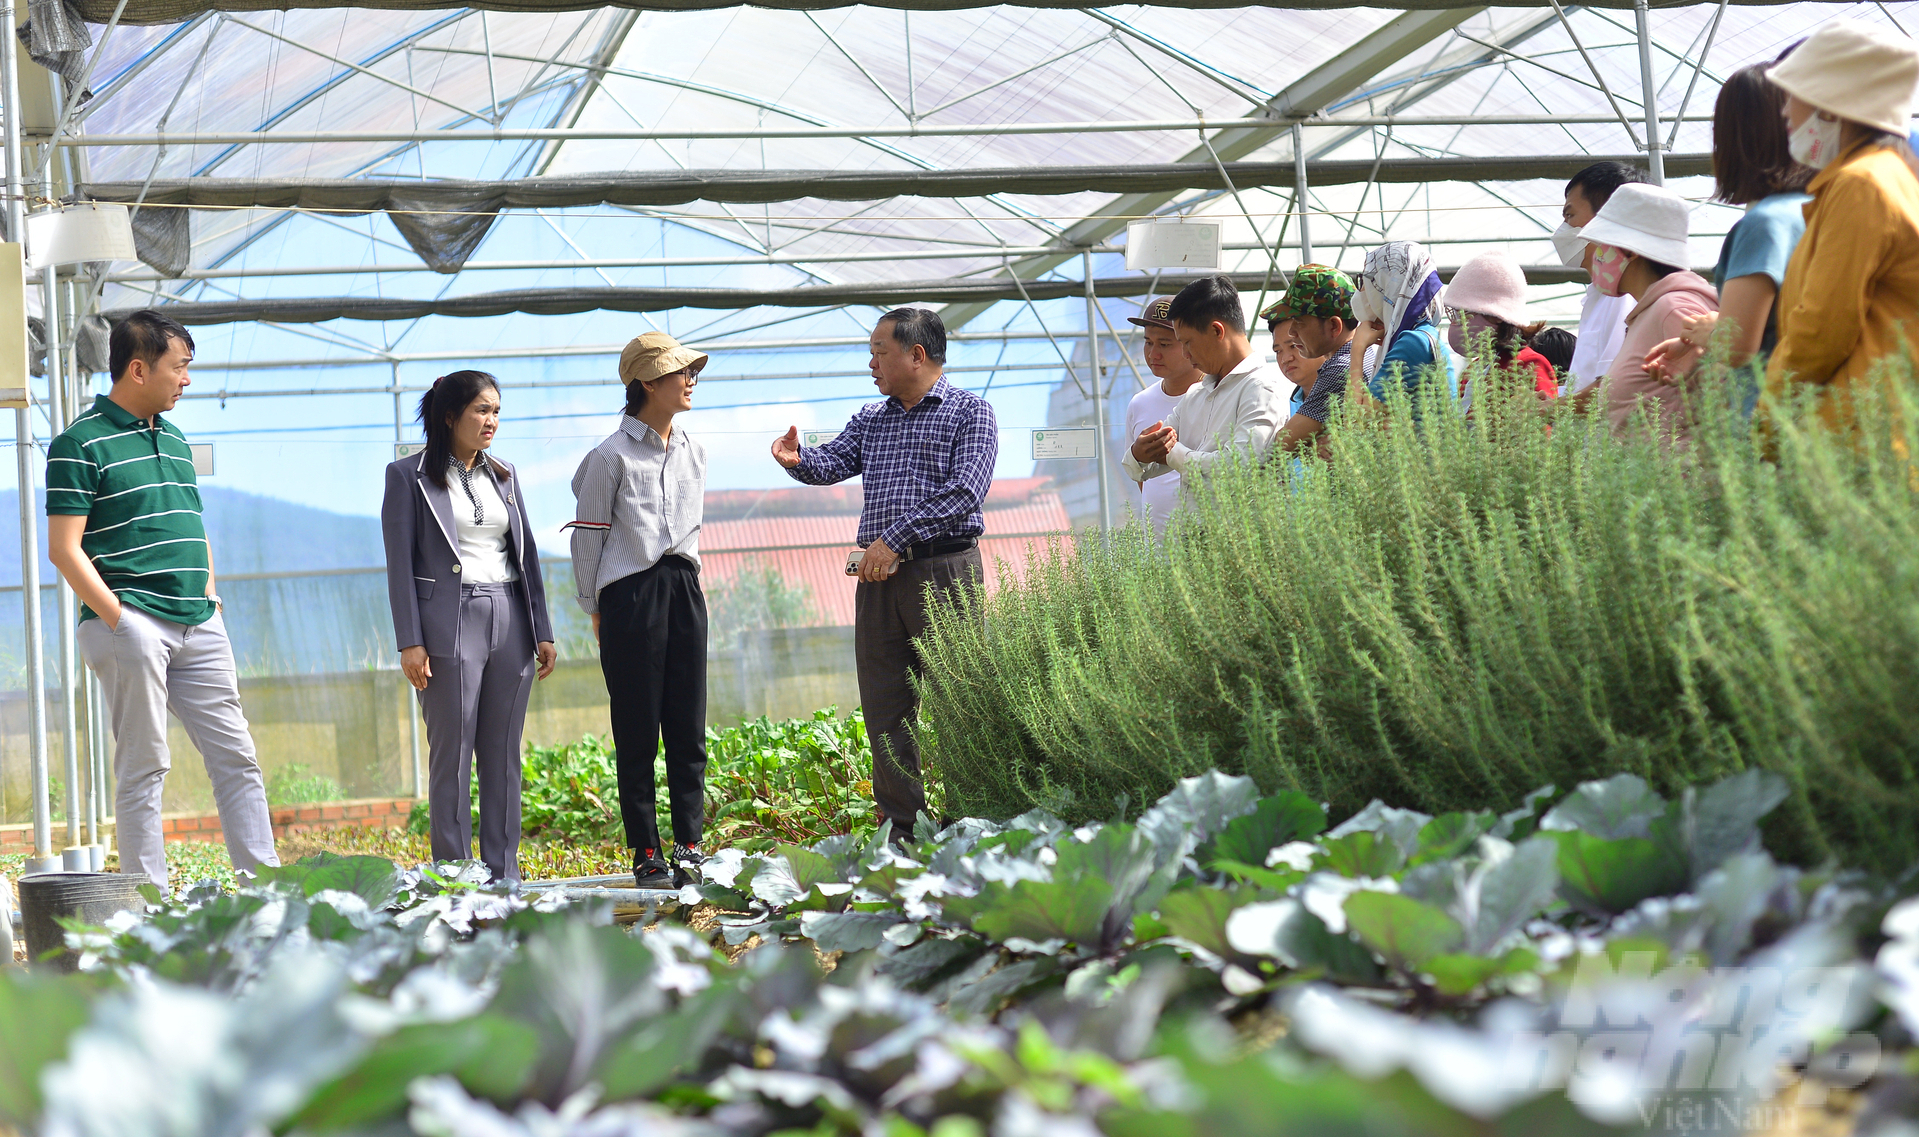 Representatives of agencies, units, businesses and people visit the organic vegetable production model in Lam Dong. Photo: Minh Hau.